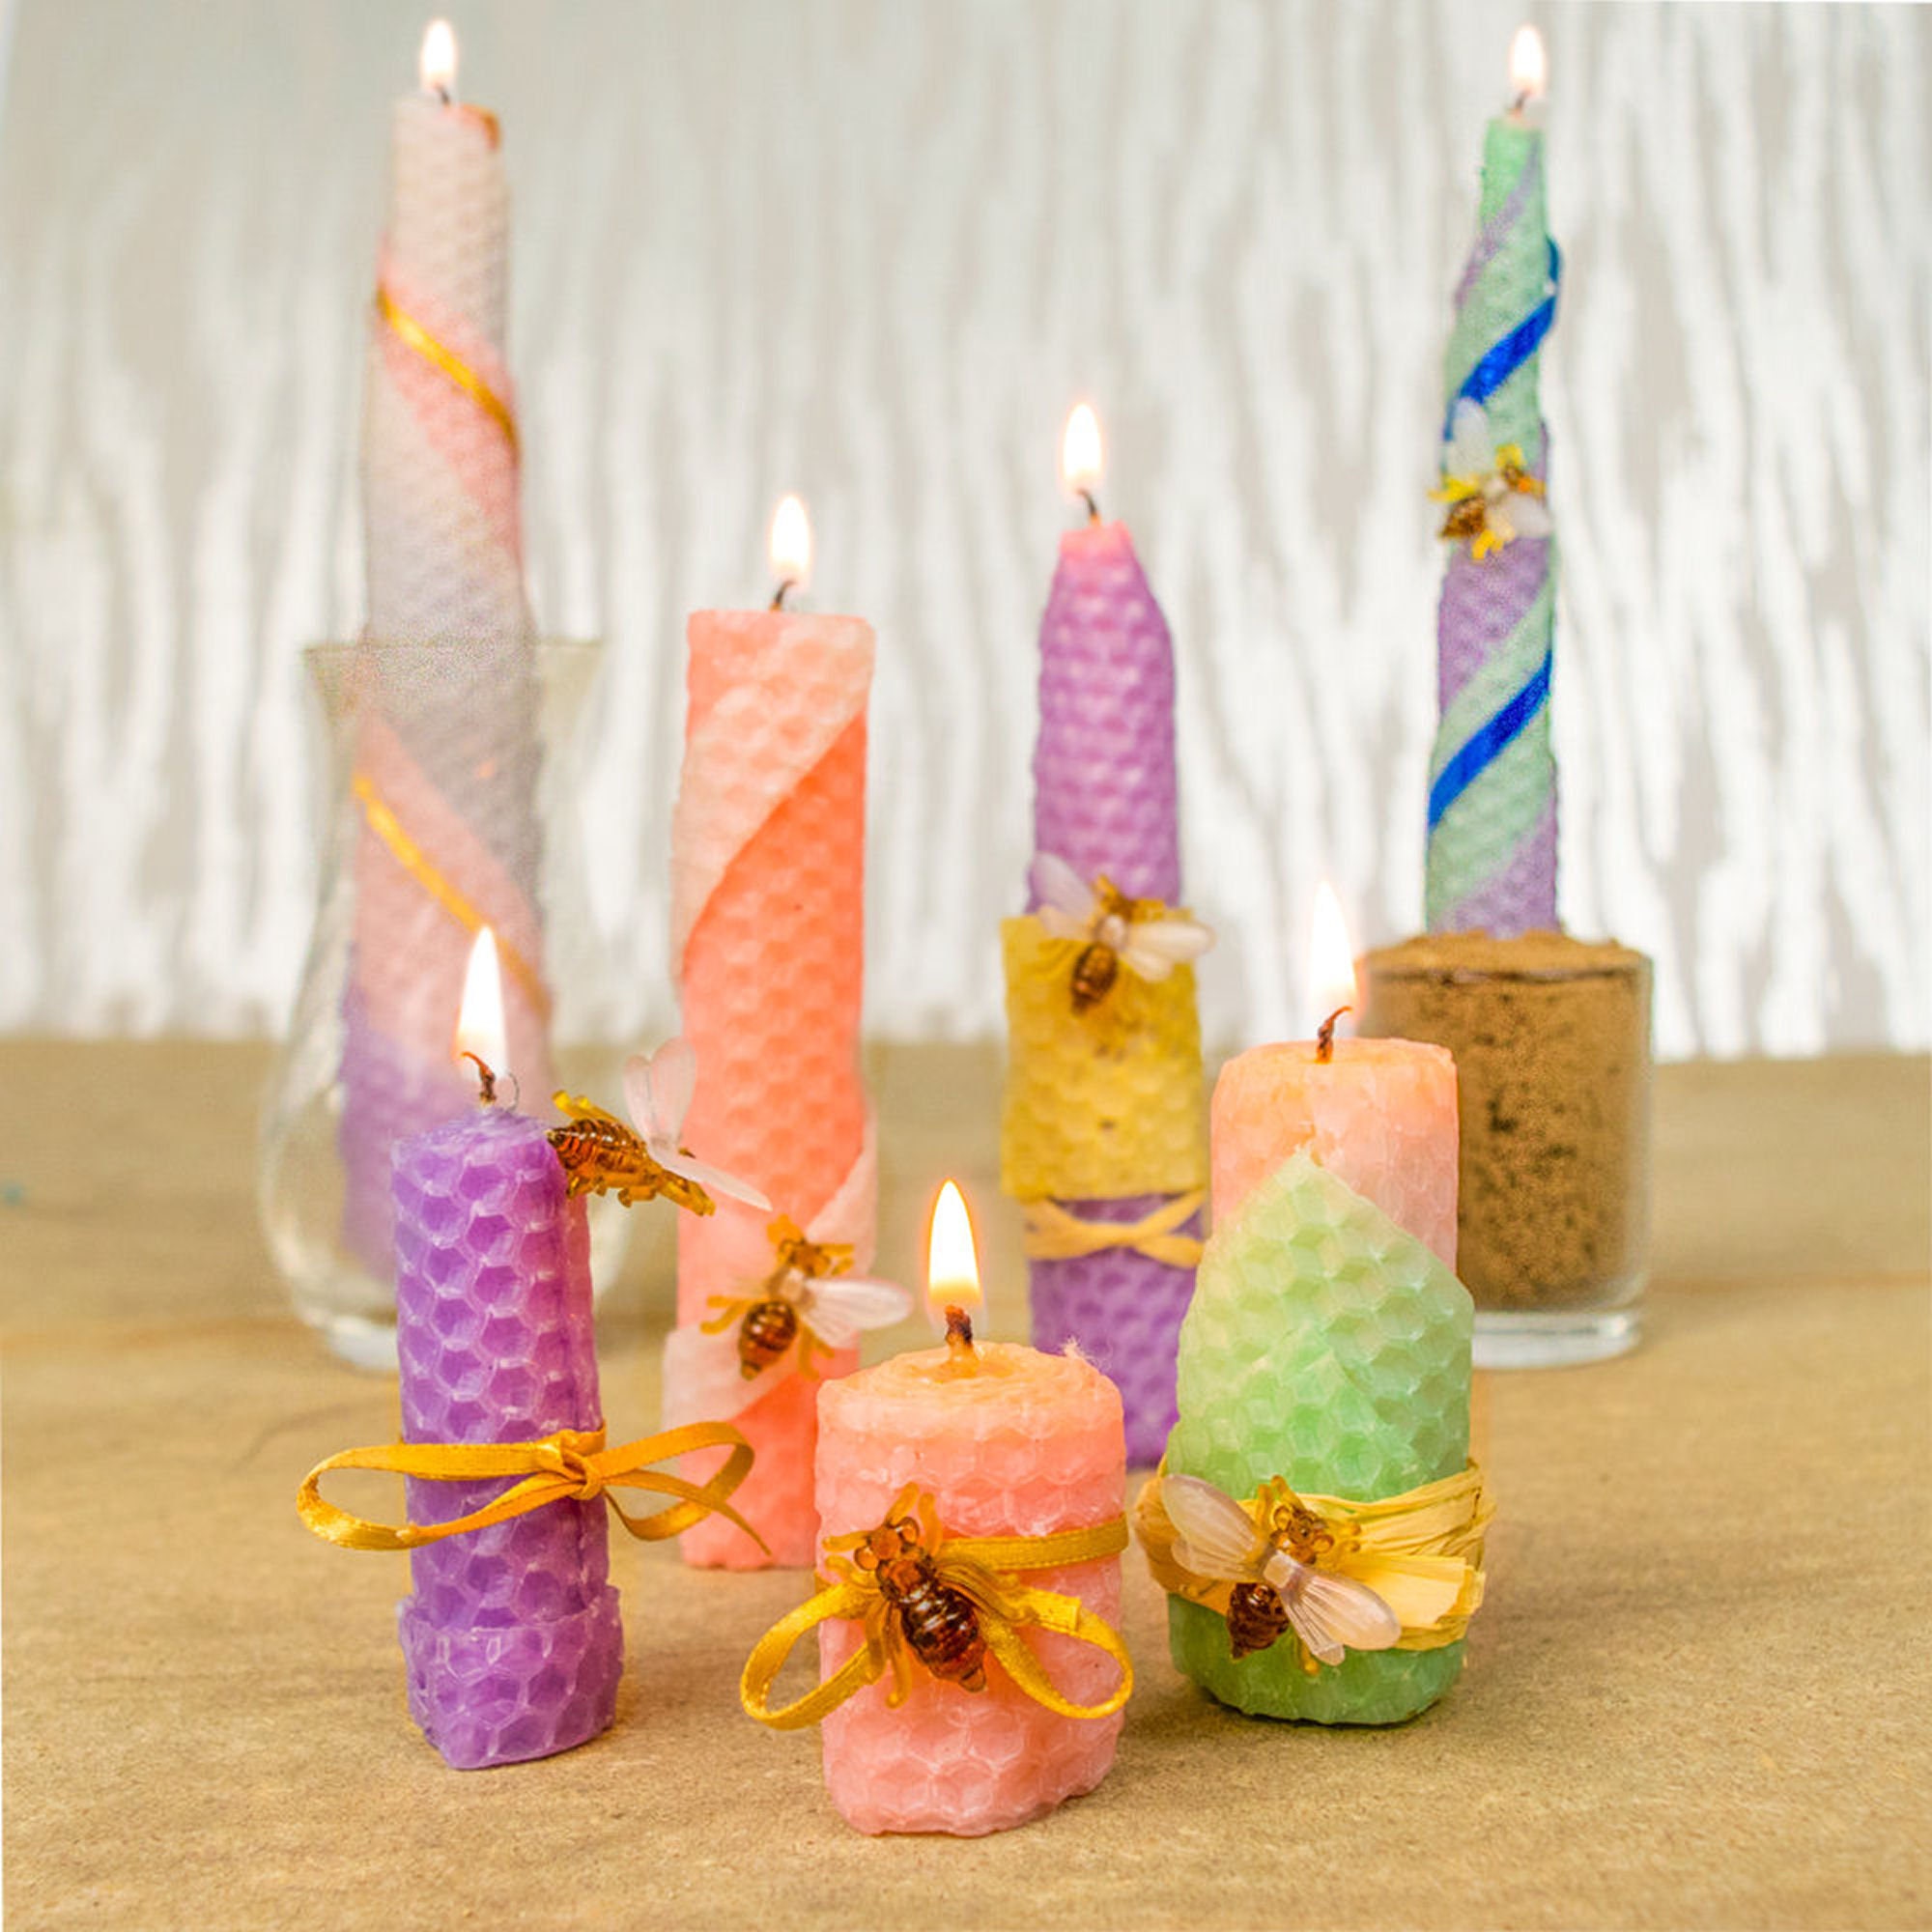 6 Ways How To Make Candles - DIY Beeswax Candles - Sew Historically